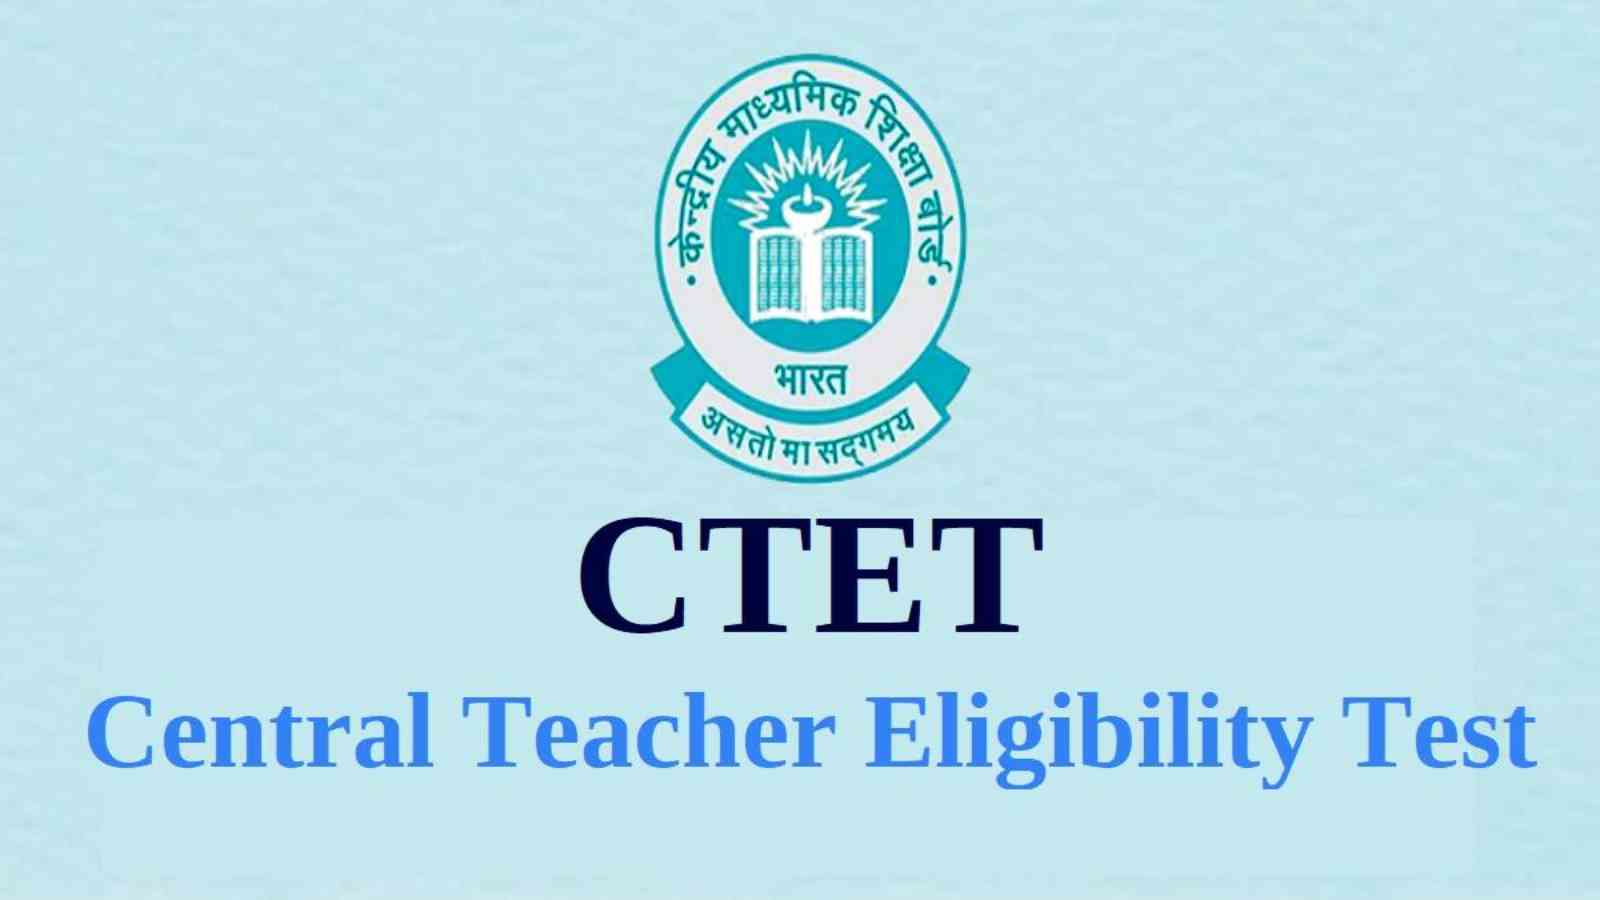 CBSE CTET 2022 schedule OUT, exam from December 28 to February 7